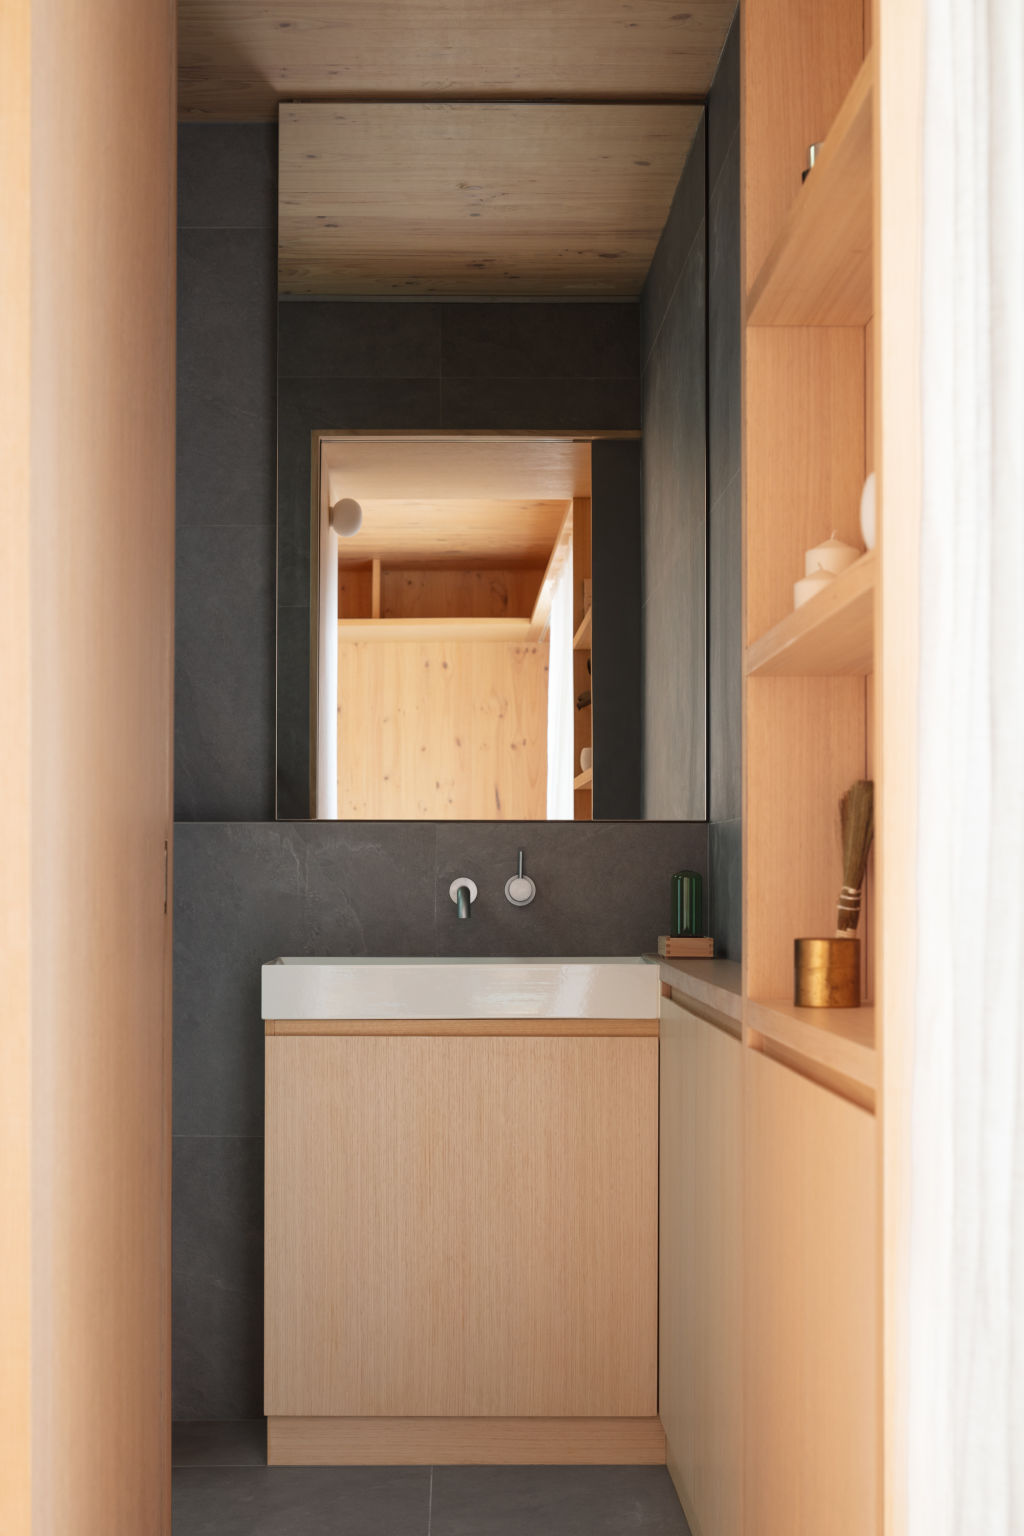 The micro homes are generous in height. Photo: Clinton Weaver